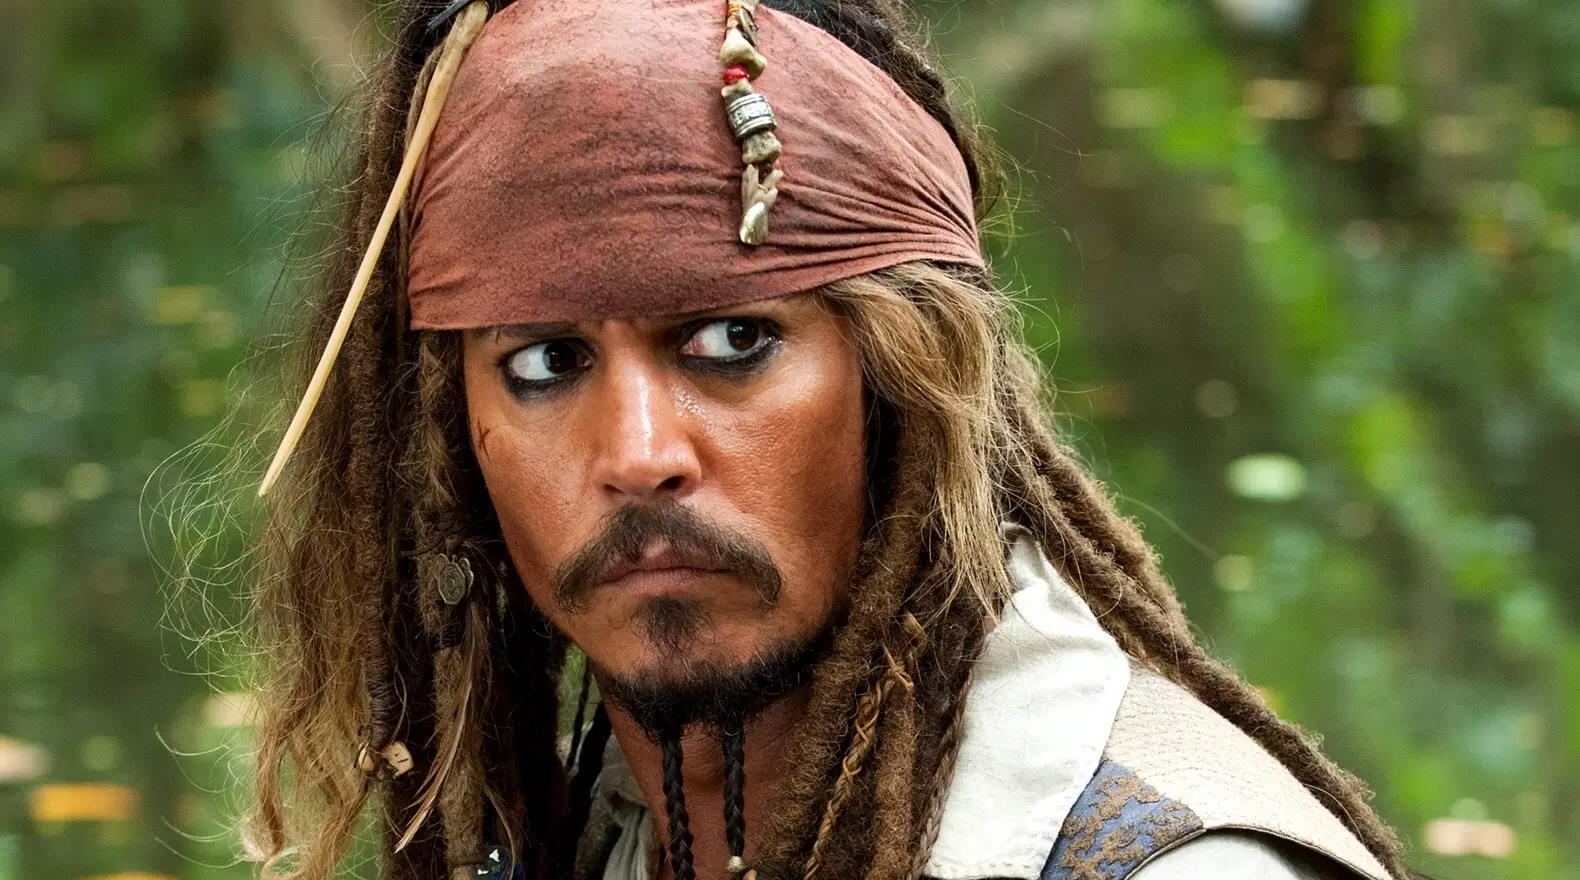 ‘Pirates of the Caribbean’ producer says Depp created Jack Sparrow, wants him in reboot